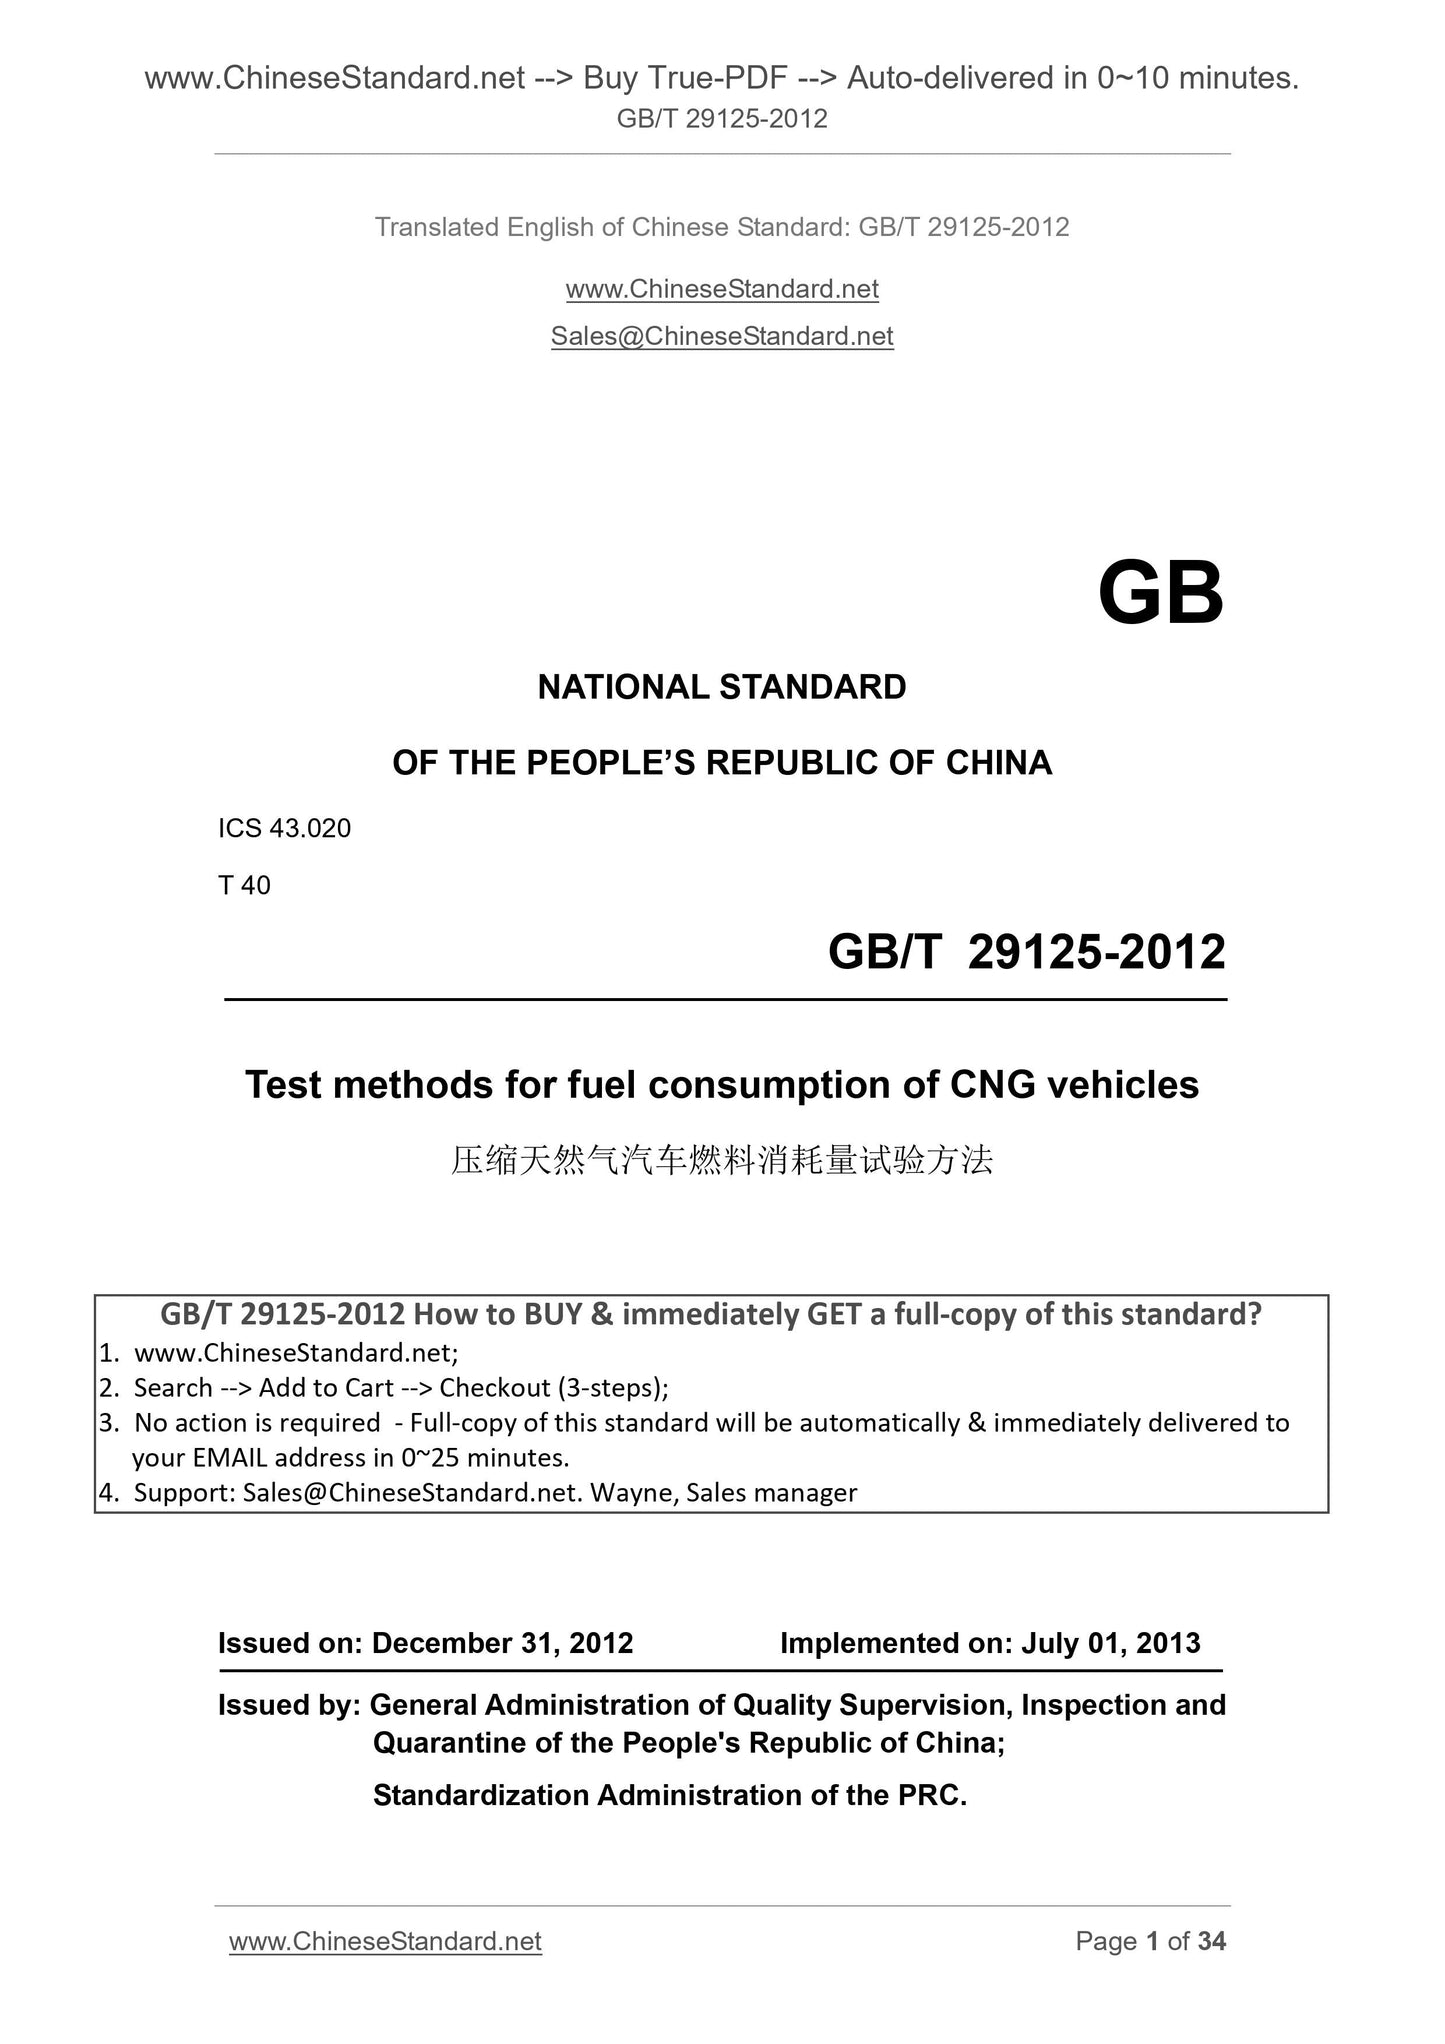 GB/T 29125-2012 Page 1